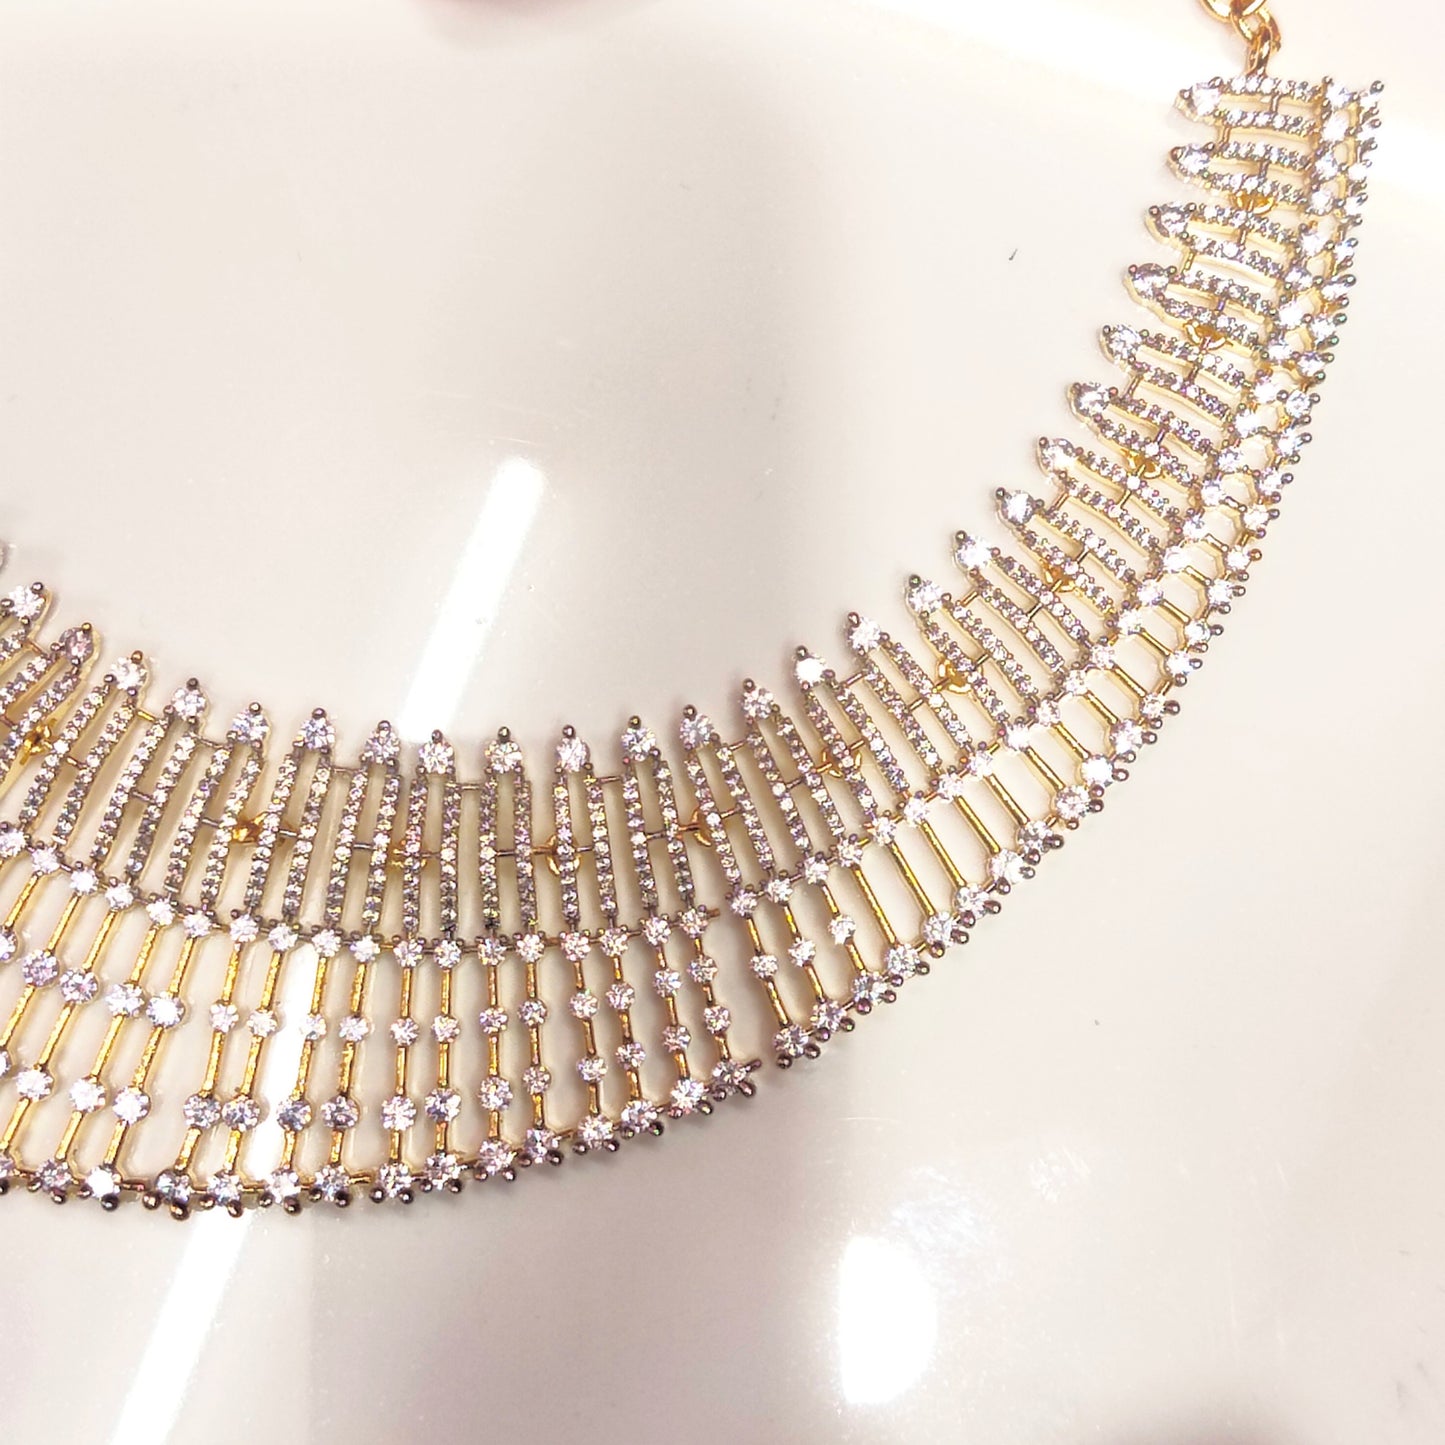 "Dazzle and Shine with Asp Fashion Jewellery's Glamorous American Diamond Necklace: Show-stopping Elegance for Every Occasion"